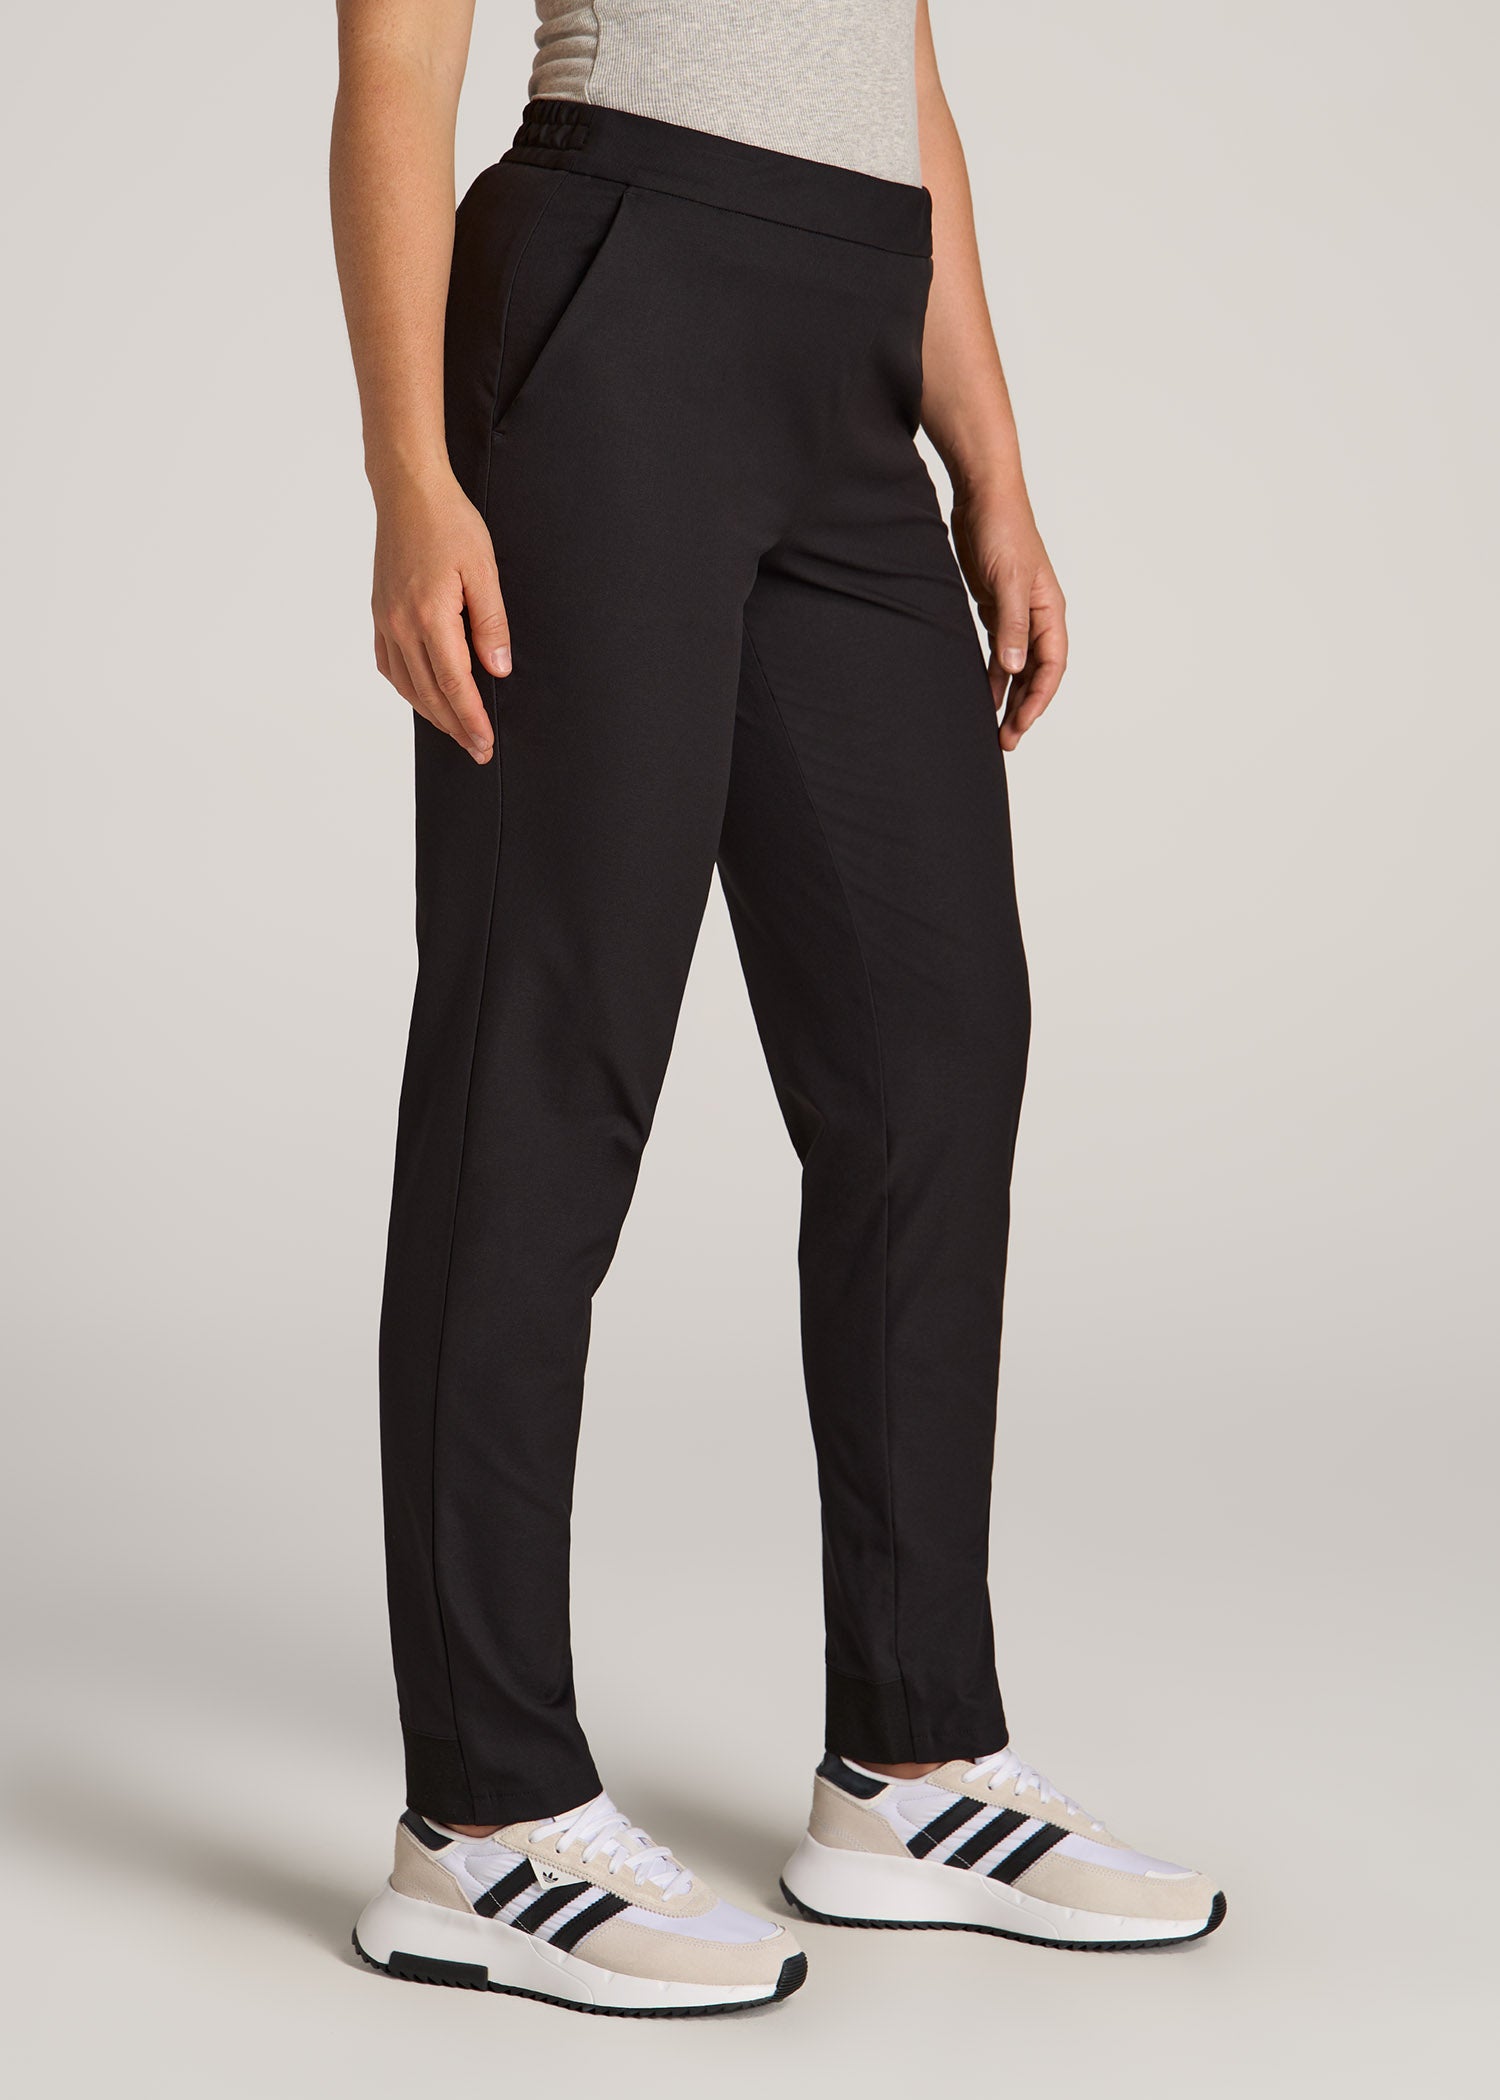 Buy Womens Stretchy Trousers Ladies Bengaline Smart Work Pull On Fitted  Trousers Elasticated High Waist Office Pants Leggings Sizes 8-22 Online at  desertcartINDIA